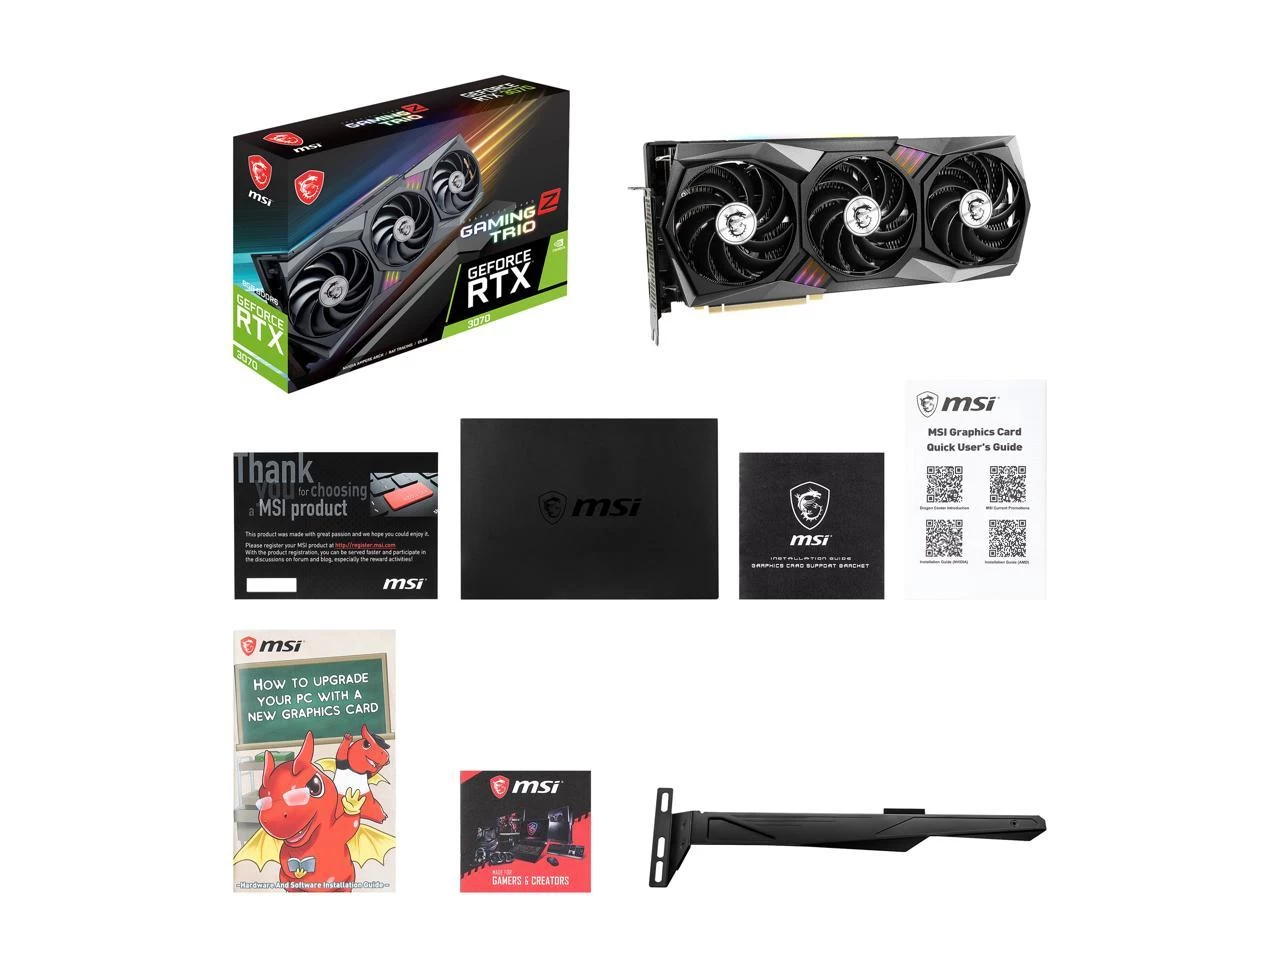 MSI GeForce RTX 3070 GAMING Z TRIO Package Content